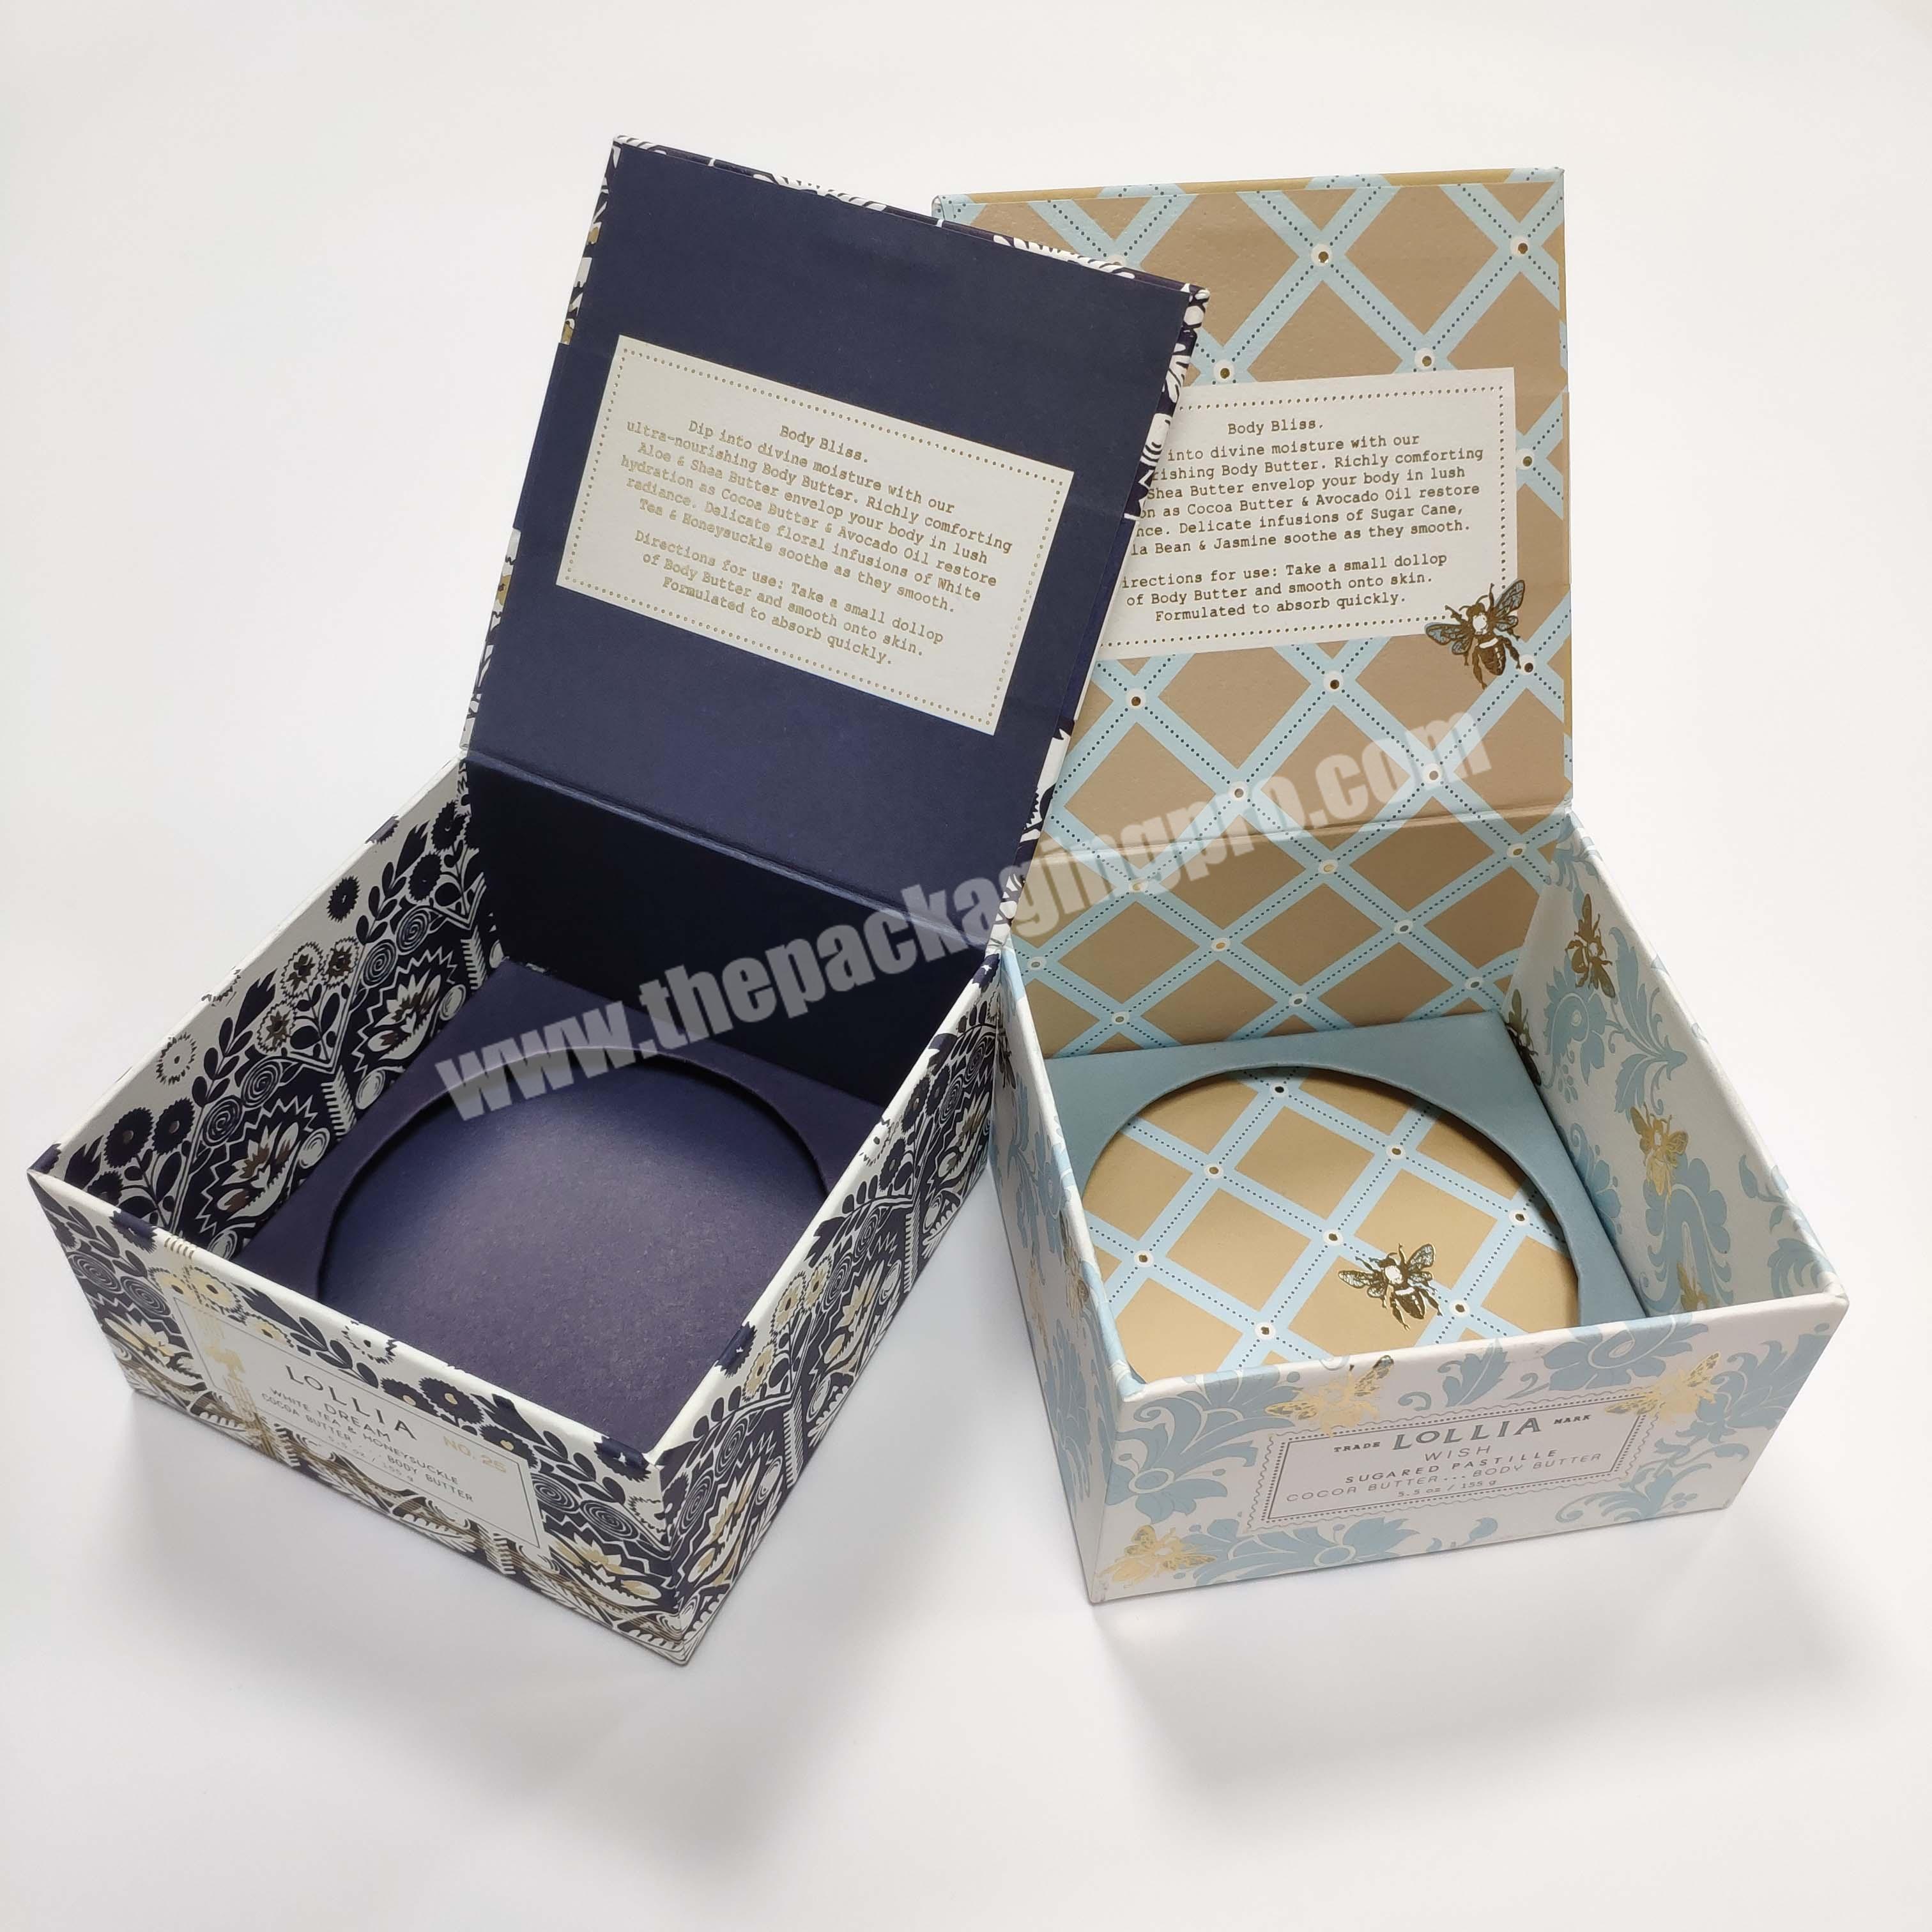 Luxury face cream skincare branded packaging box with card insert holder